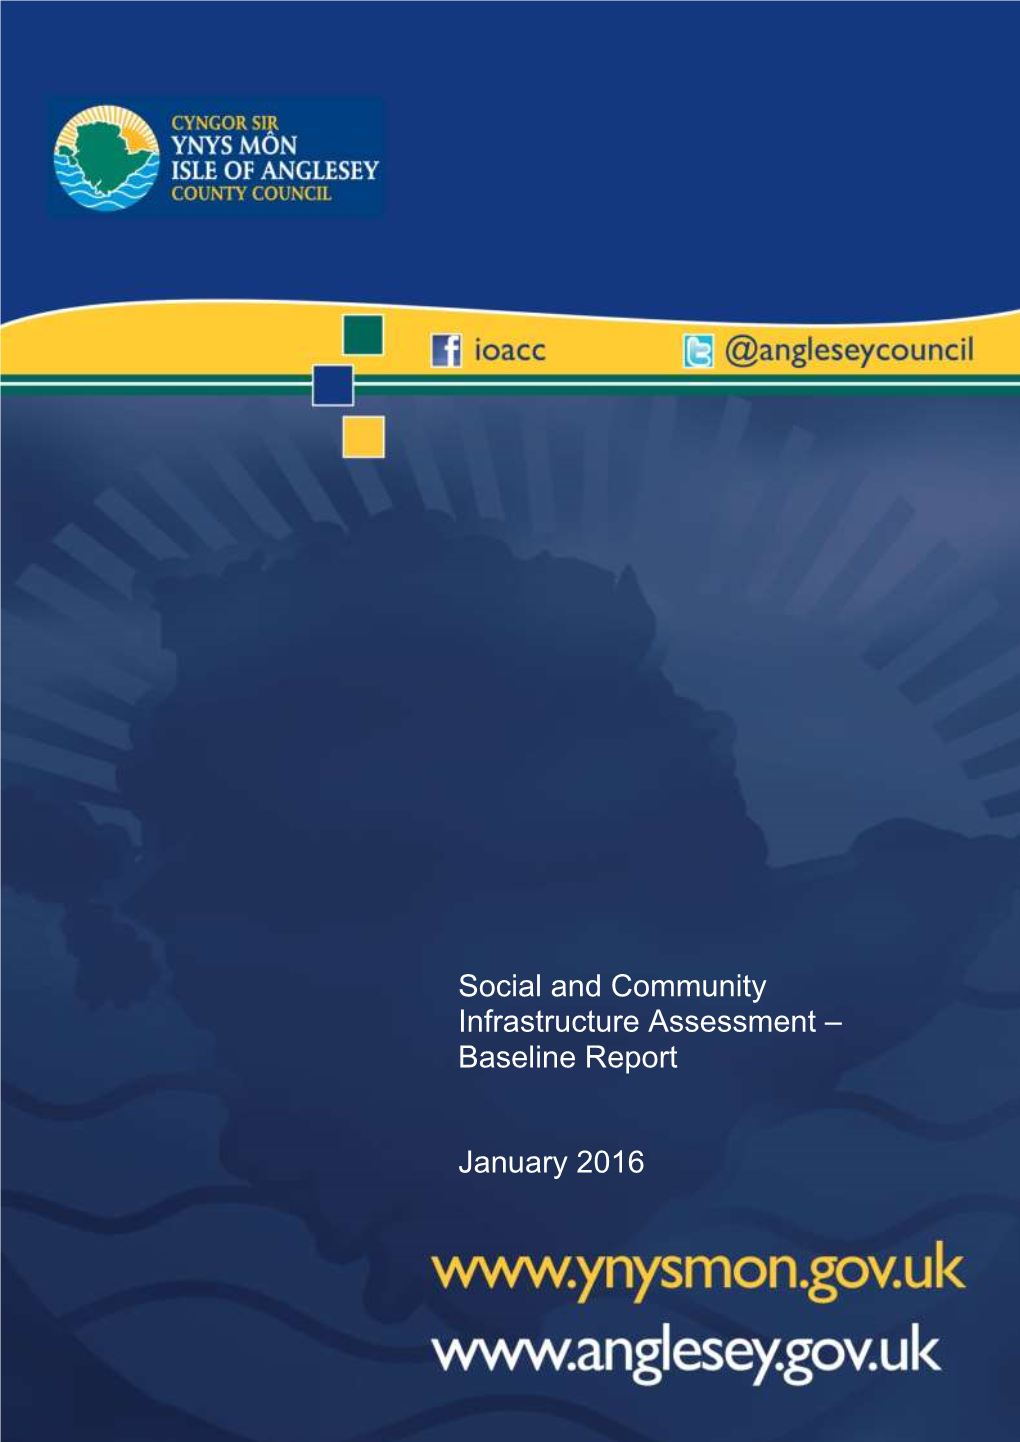 Social and Community Infrastructure Assessment – Baseline Report